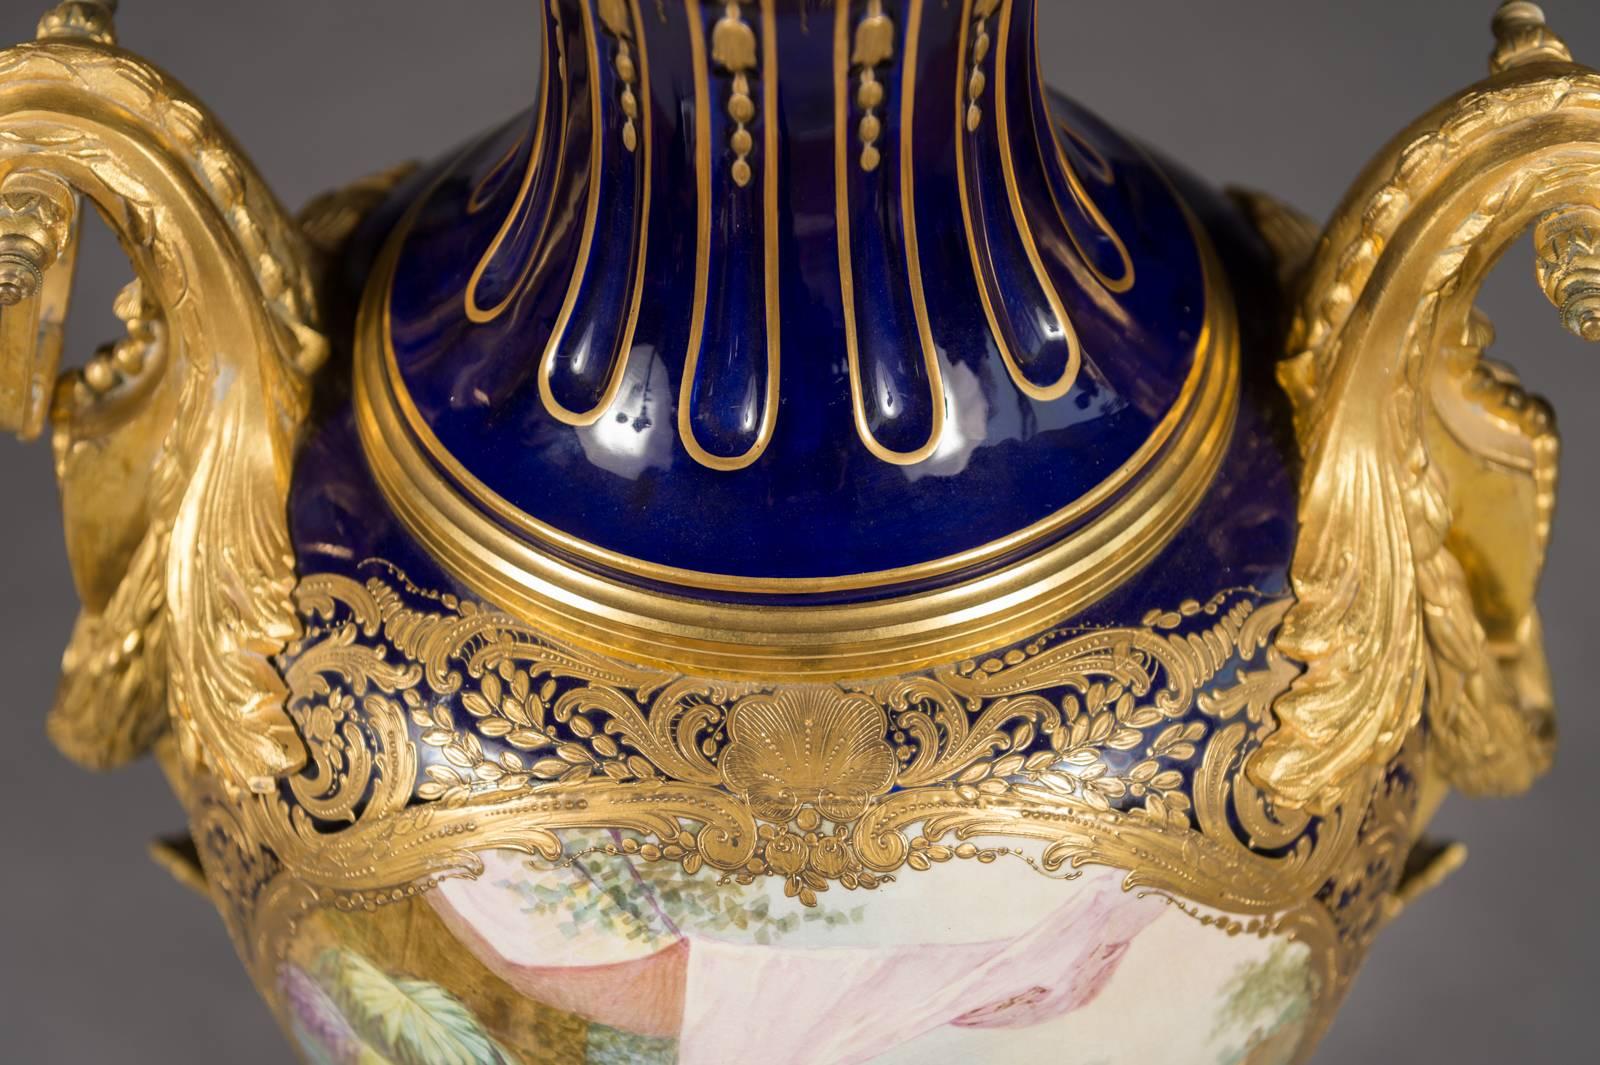 Large 19th Century French Sevres Ormolu Mounted Porcelain Covered Vase For Sale 2